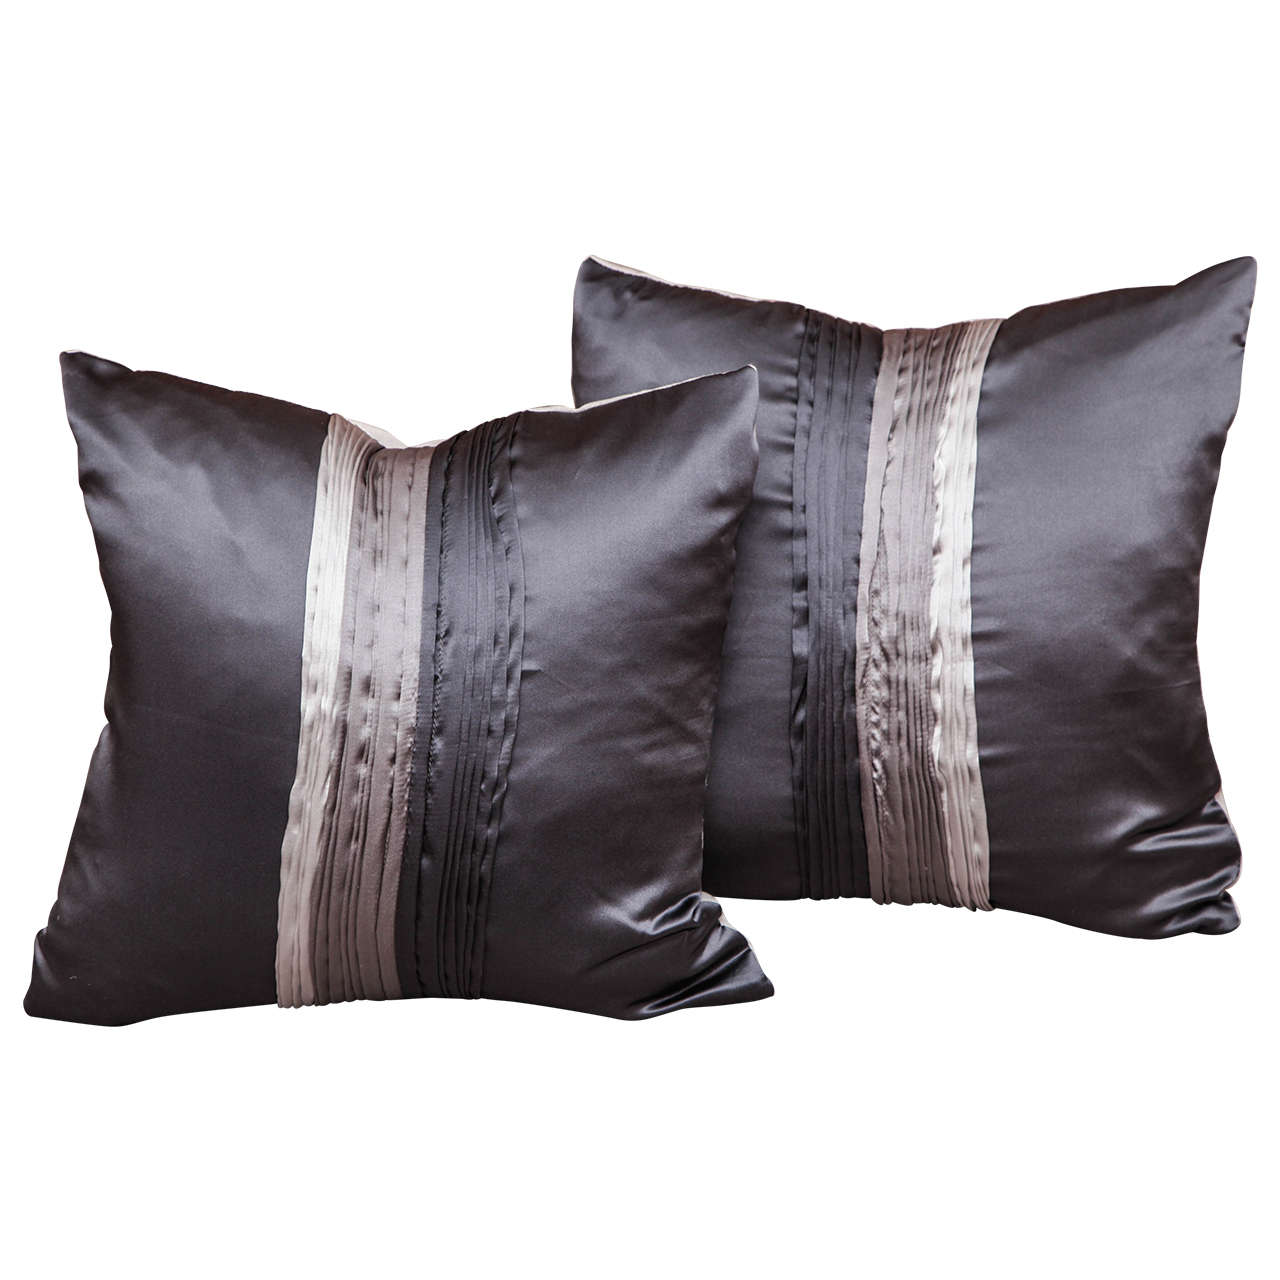 Silk Elegant Pillows with Art Deco Style For Sale